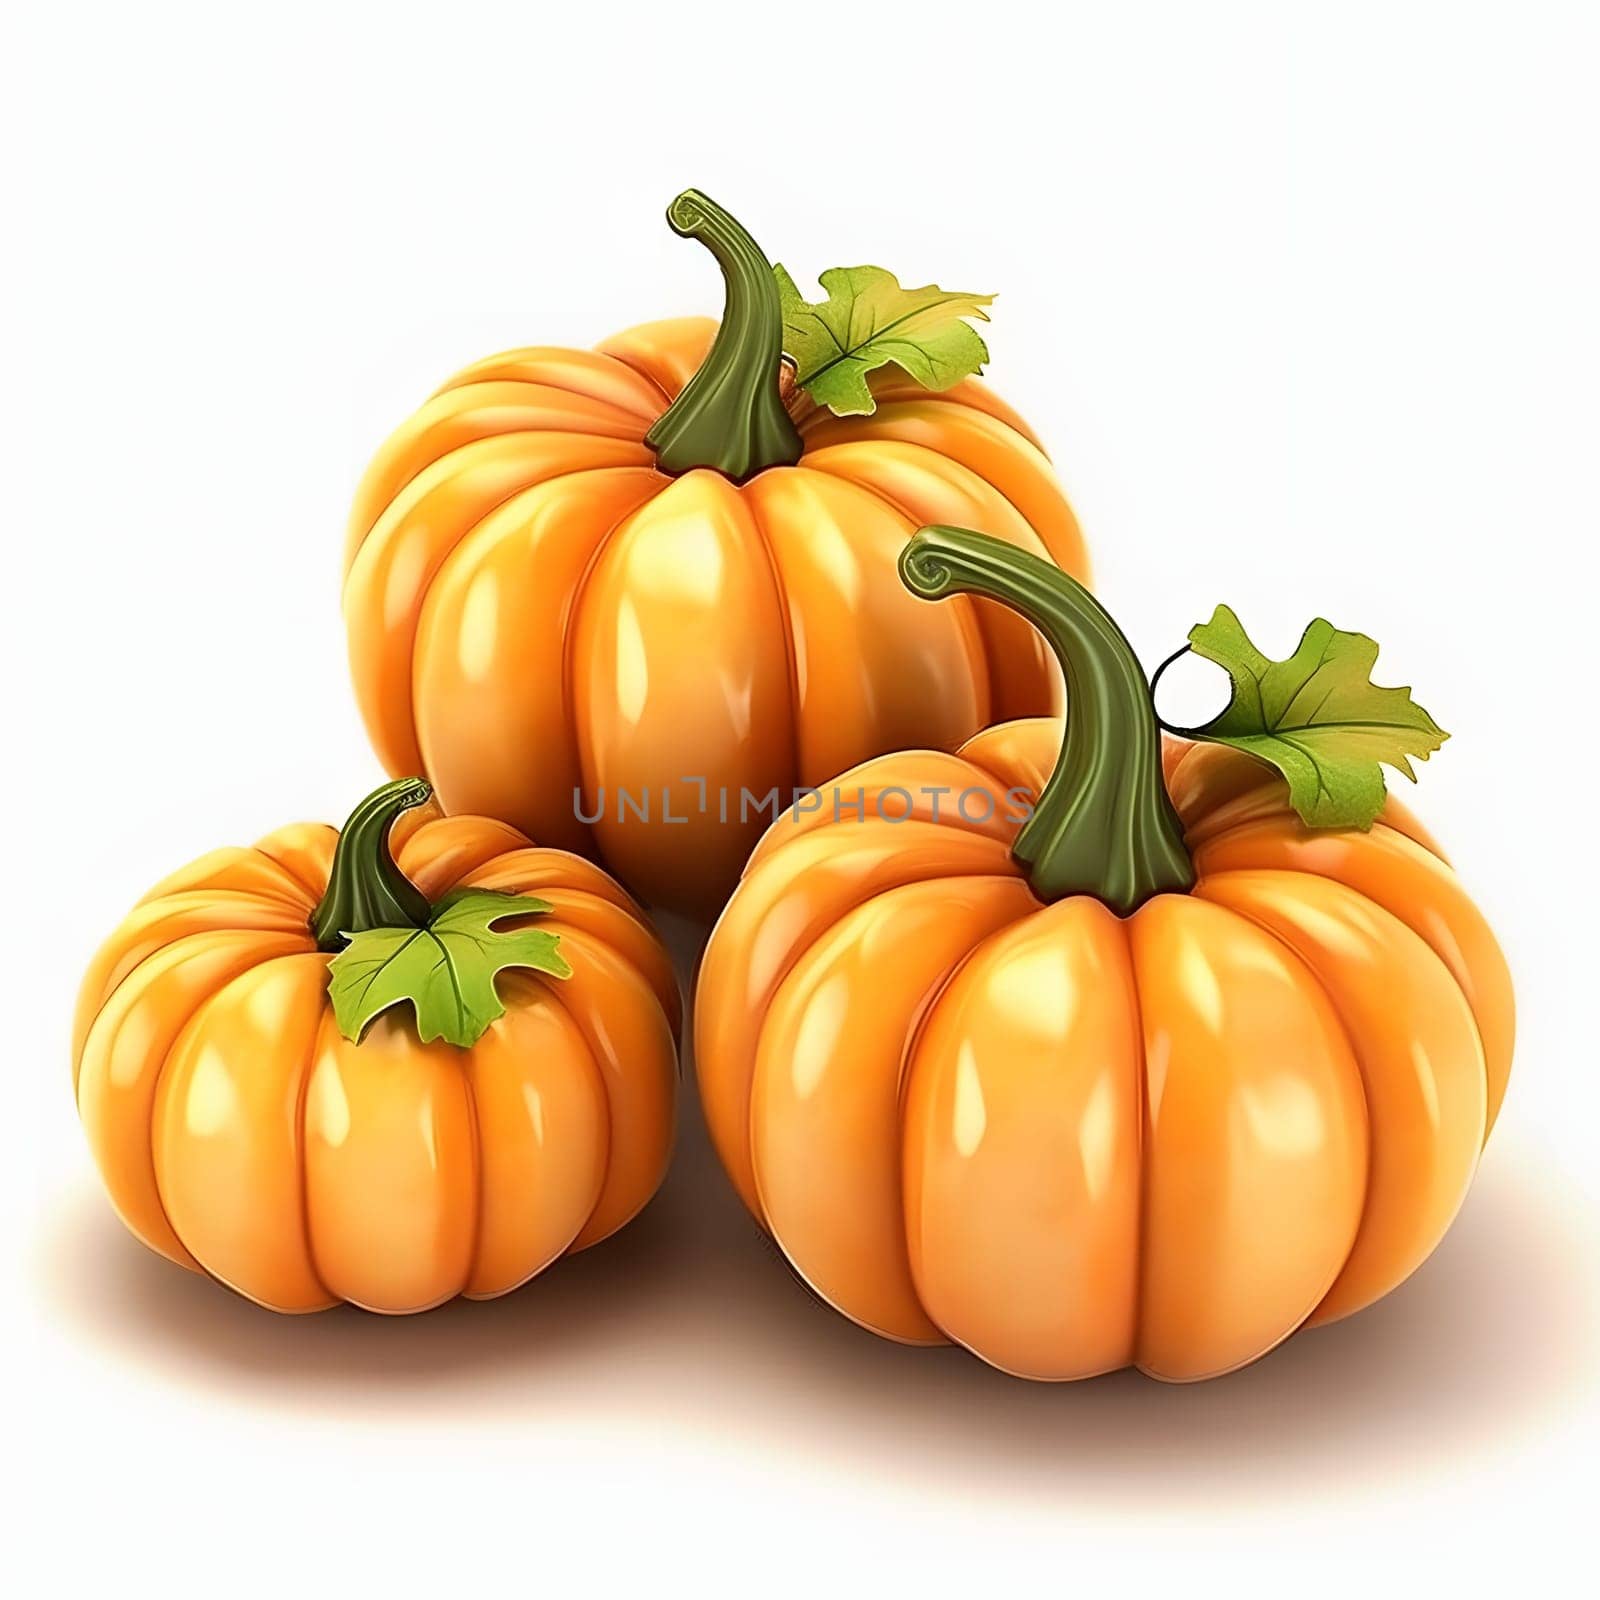 Illustration of three orange 3D pumpkins. Pumpkin as a dish of thanksgiving for the harvest, picture on a white isolated background. Atmosphere of joy and celebration.